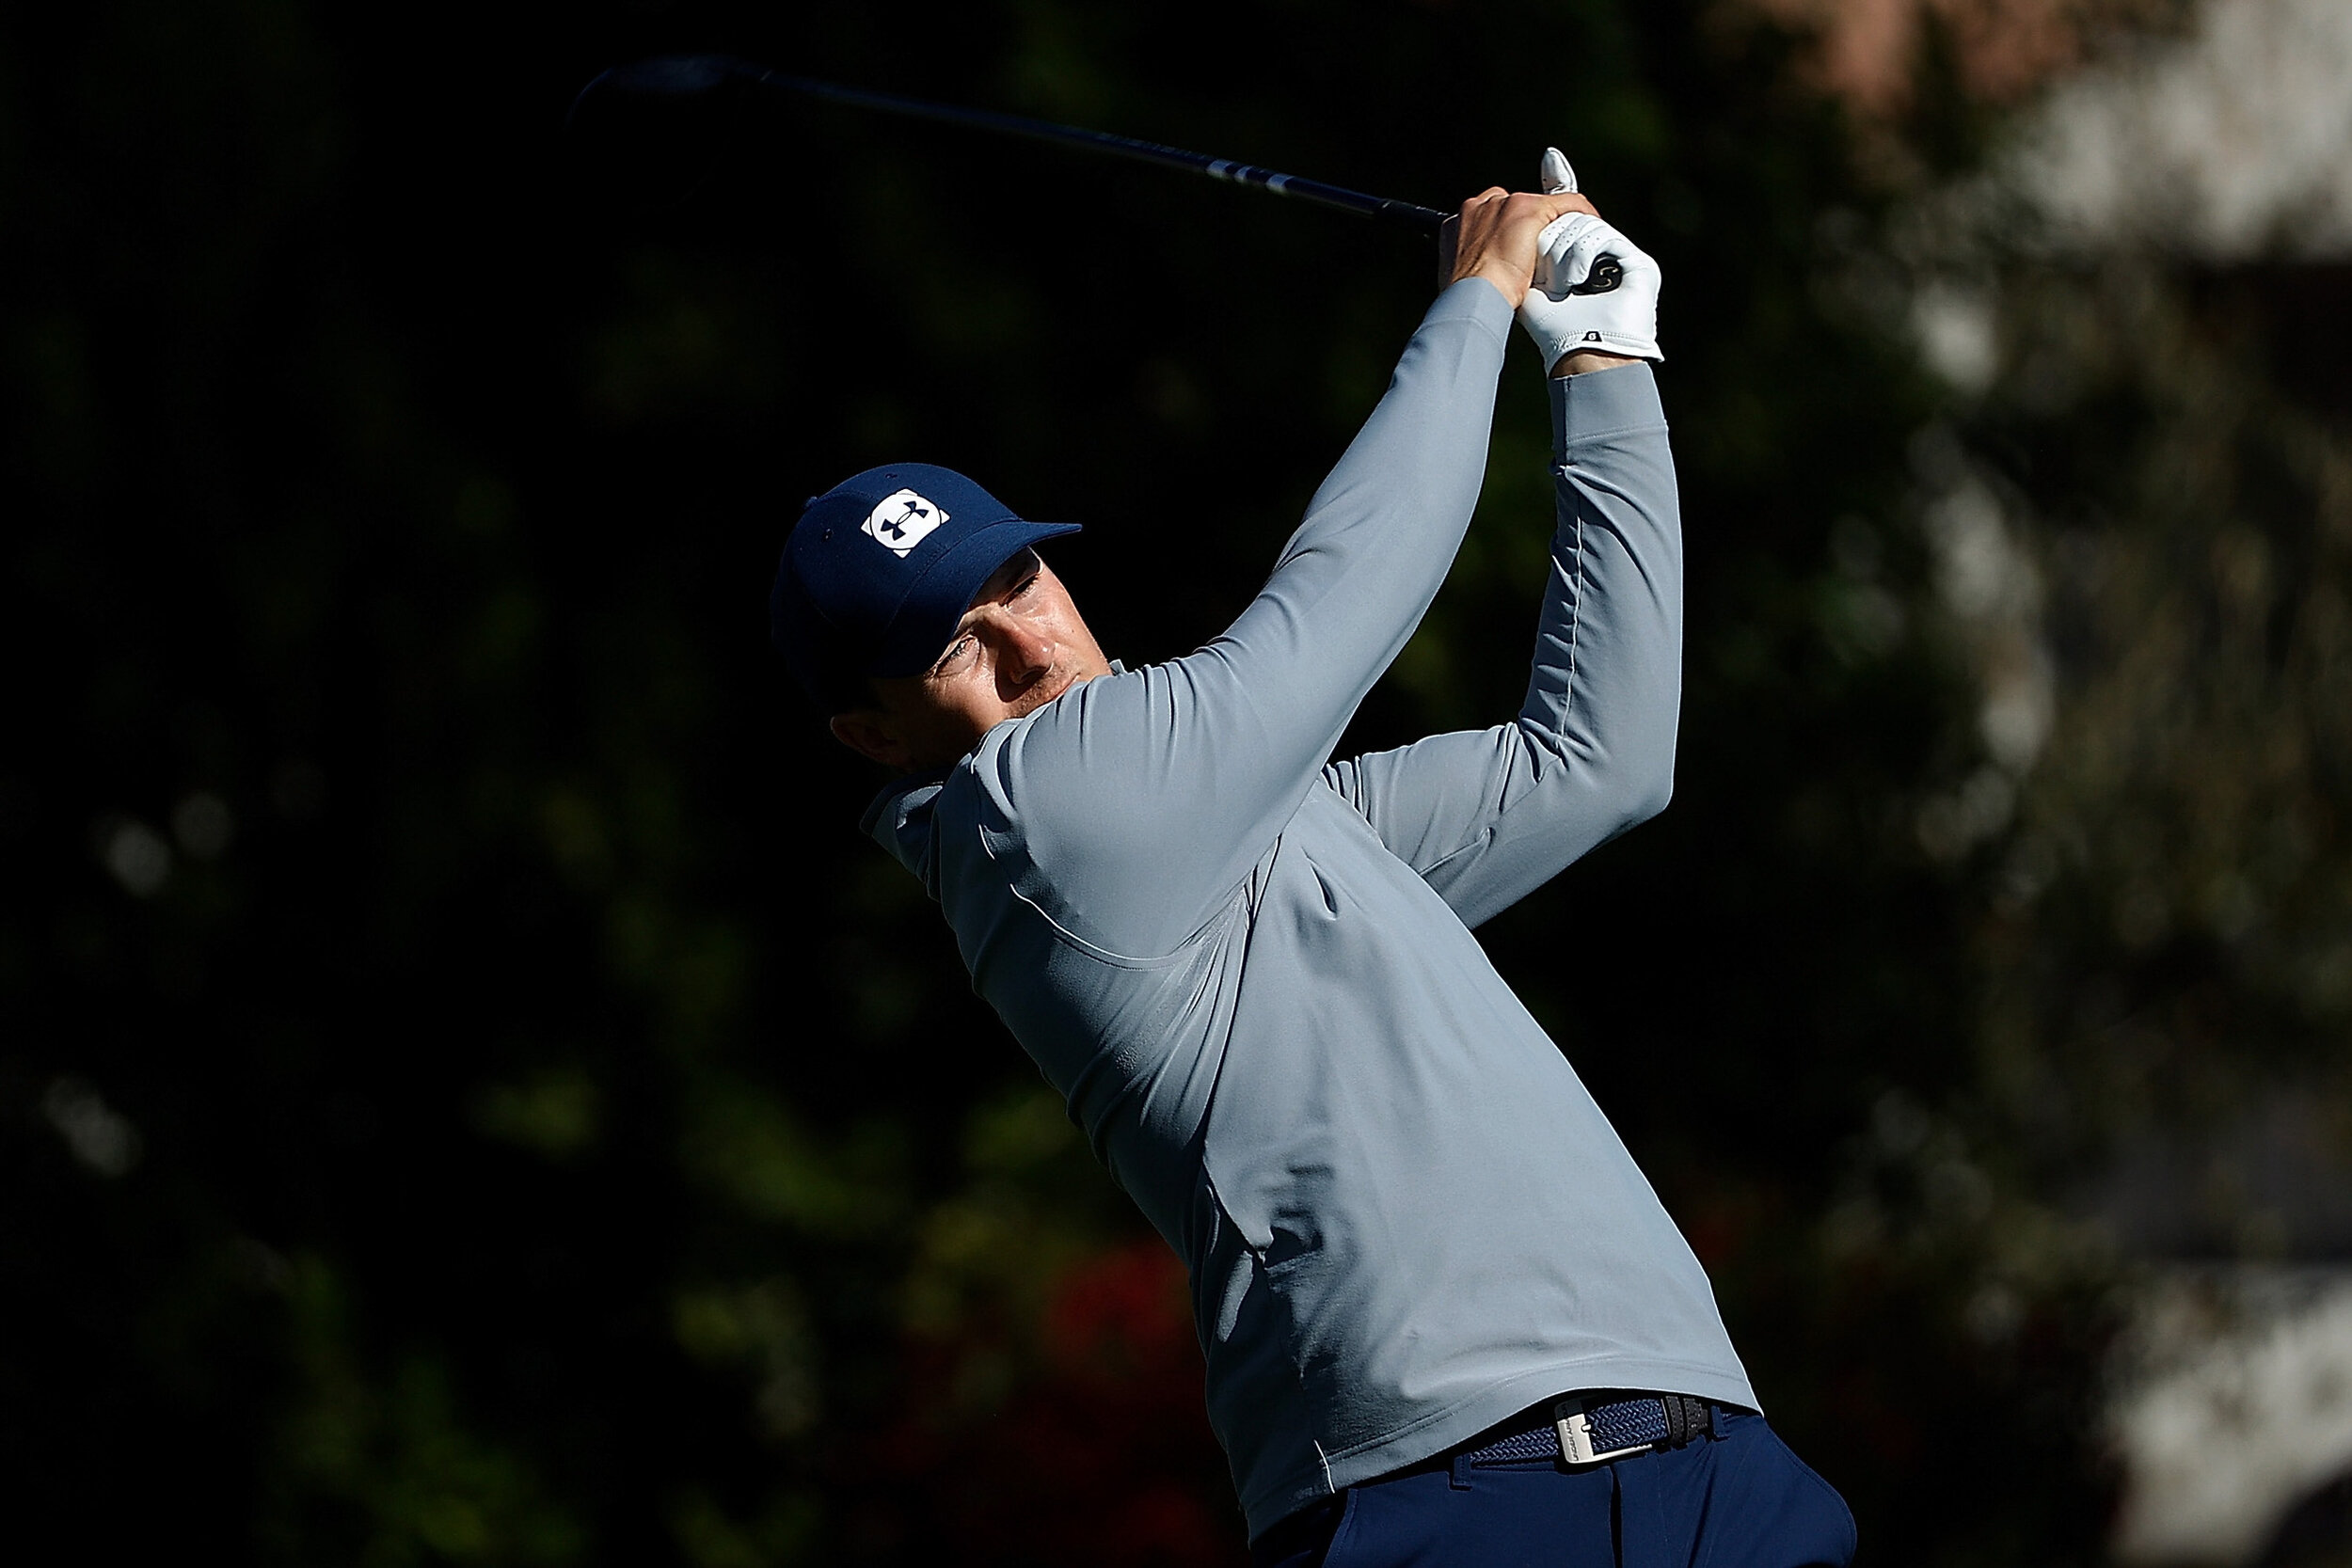  SCOTTSDALE, ARIZONA - FEBRUARY 06: Jordan Spieth of the United States hits his tee shot on the second hole during the third round of the Waste Management Phoenix Open at TPC Scottsdale on February 06, 2021 in Scottsdale, Arizona. (Photo by Christian